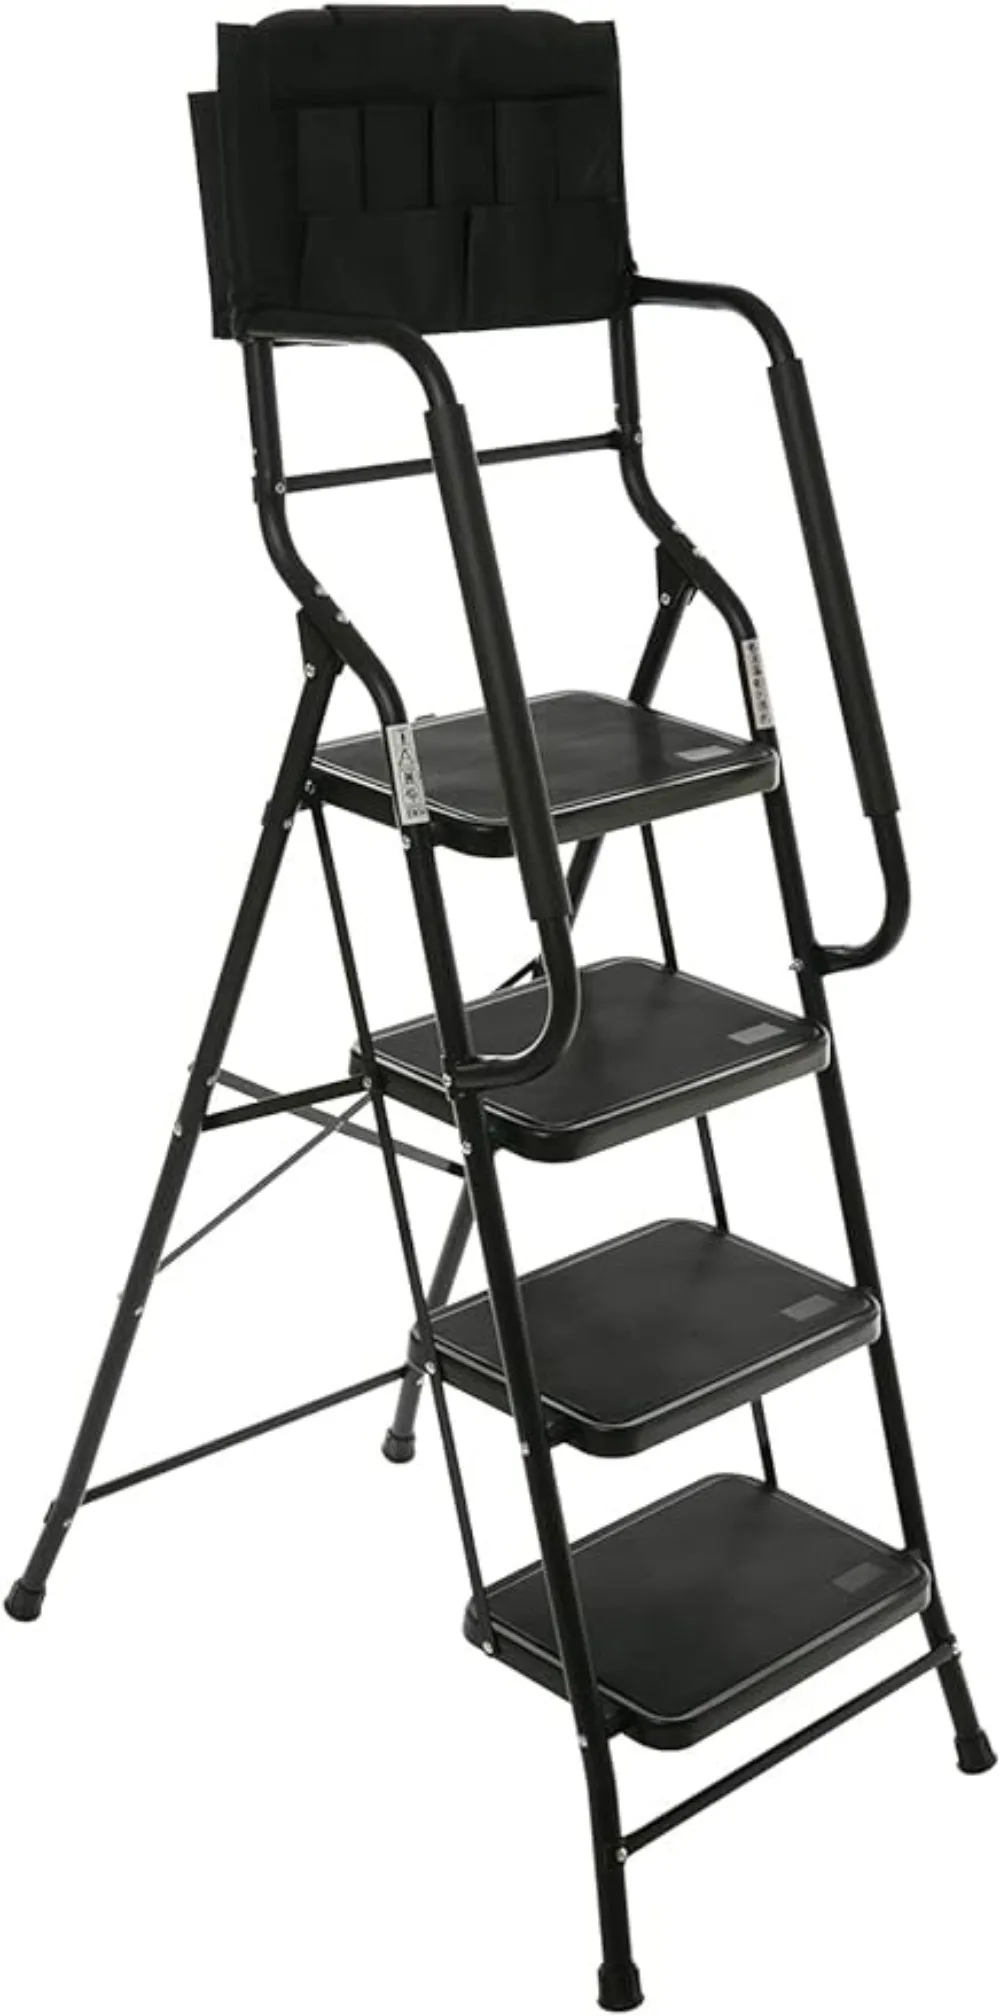 

WiberWi 4 Step Ladder with Handrails 500 lb Capacity Step Stool Folding Portable Ladders for Home Kitchen Steel Frame with Non-S